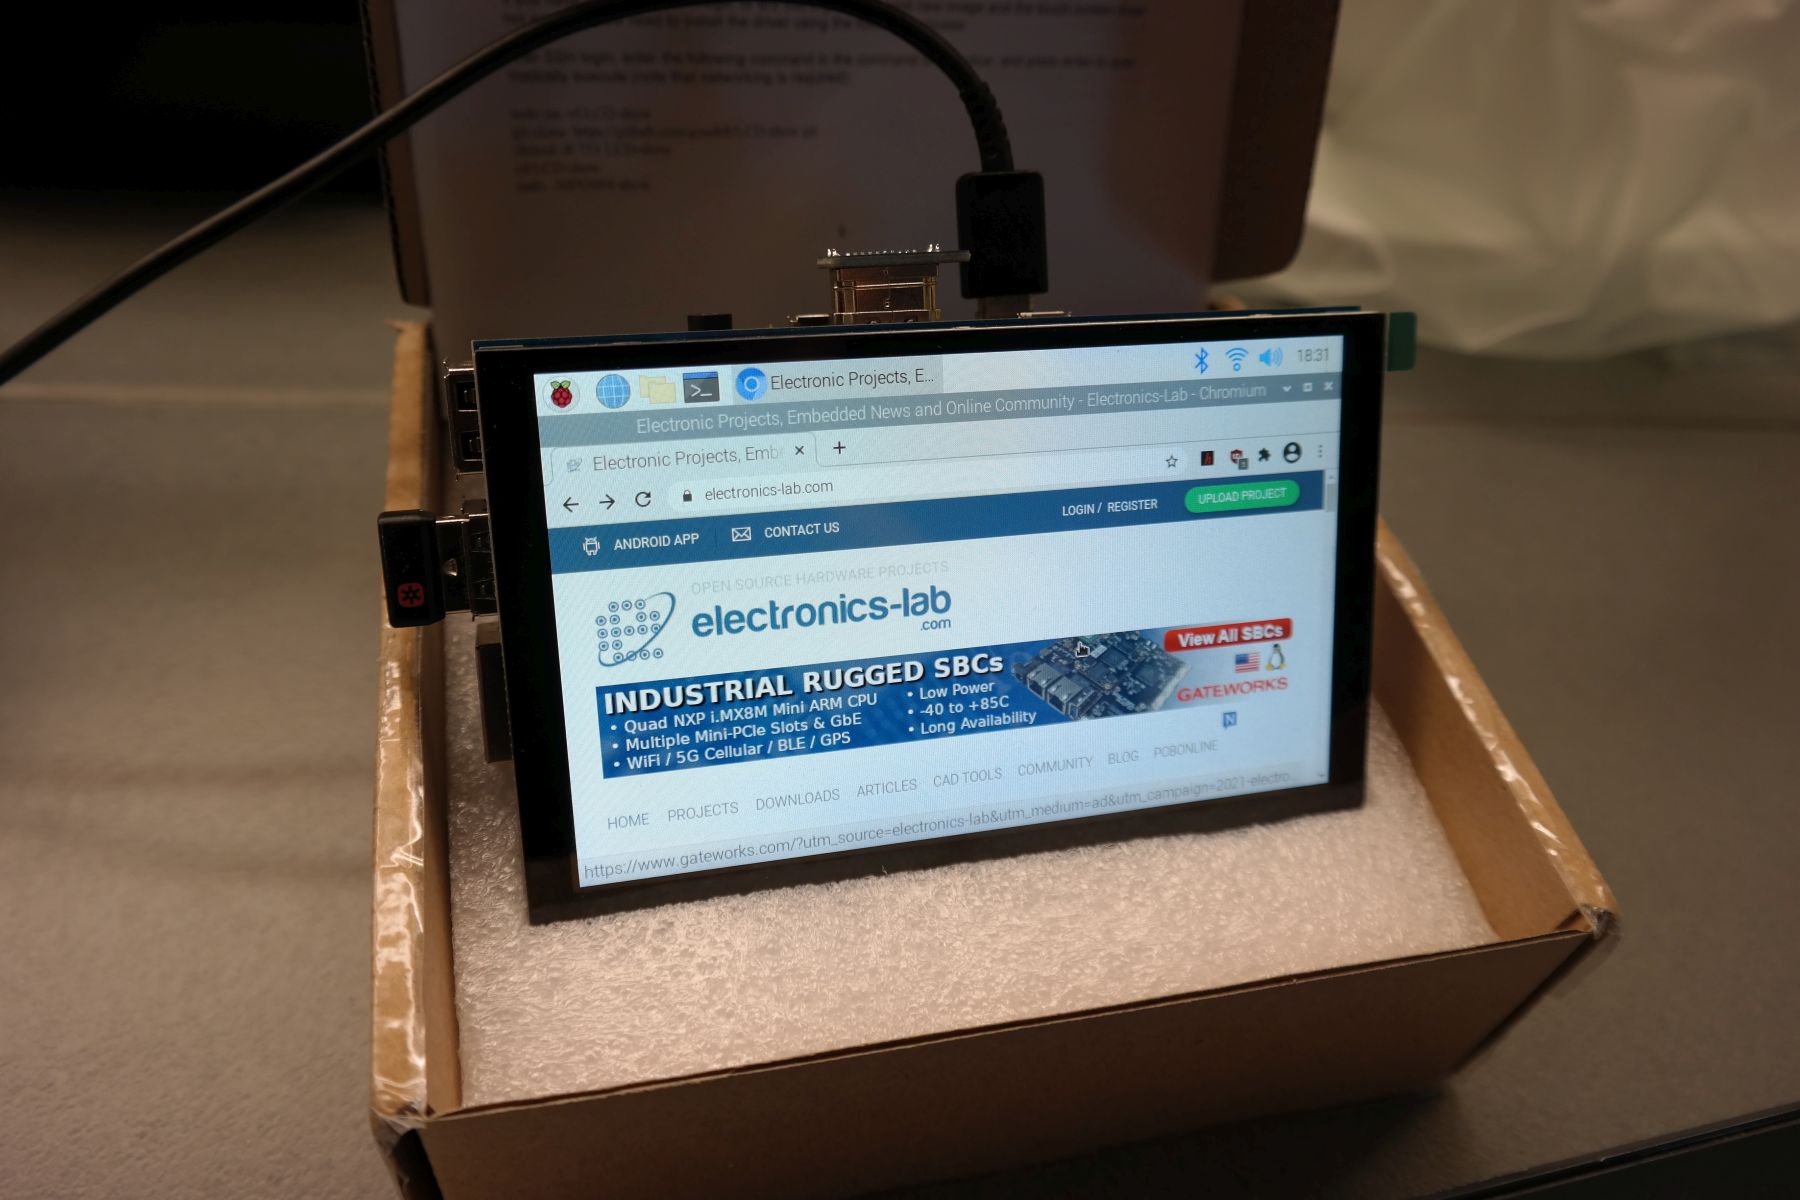 Get this sunlight readable display for Raspberry Pi at just $110